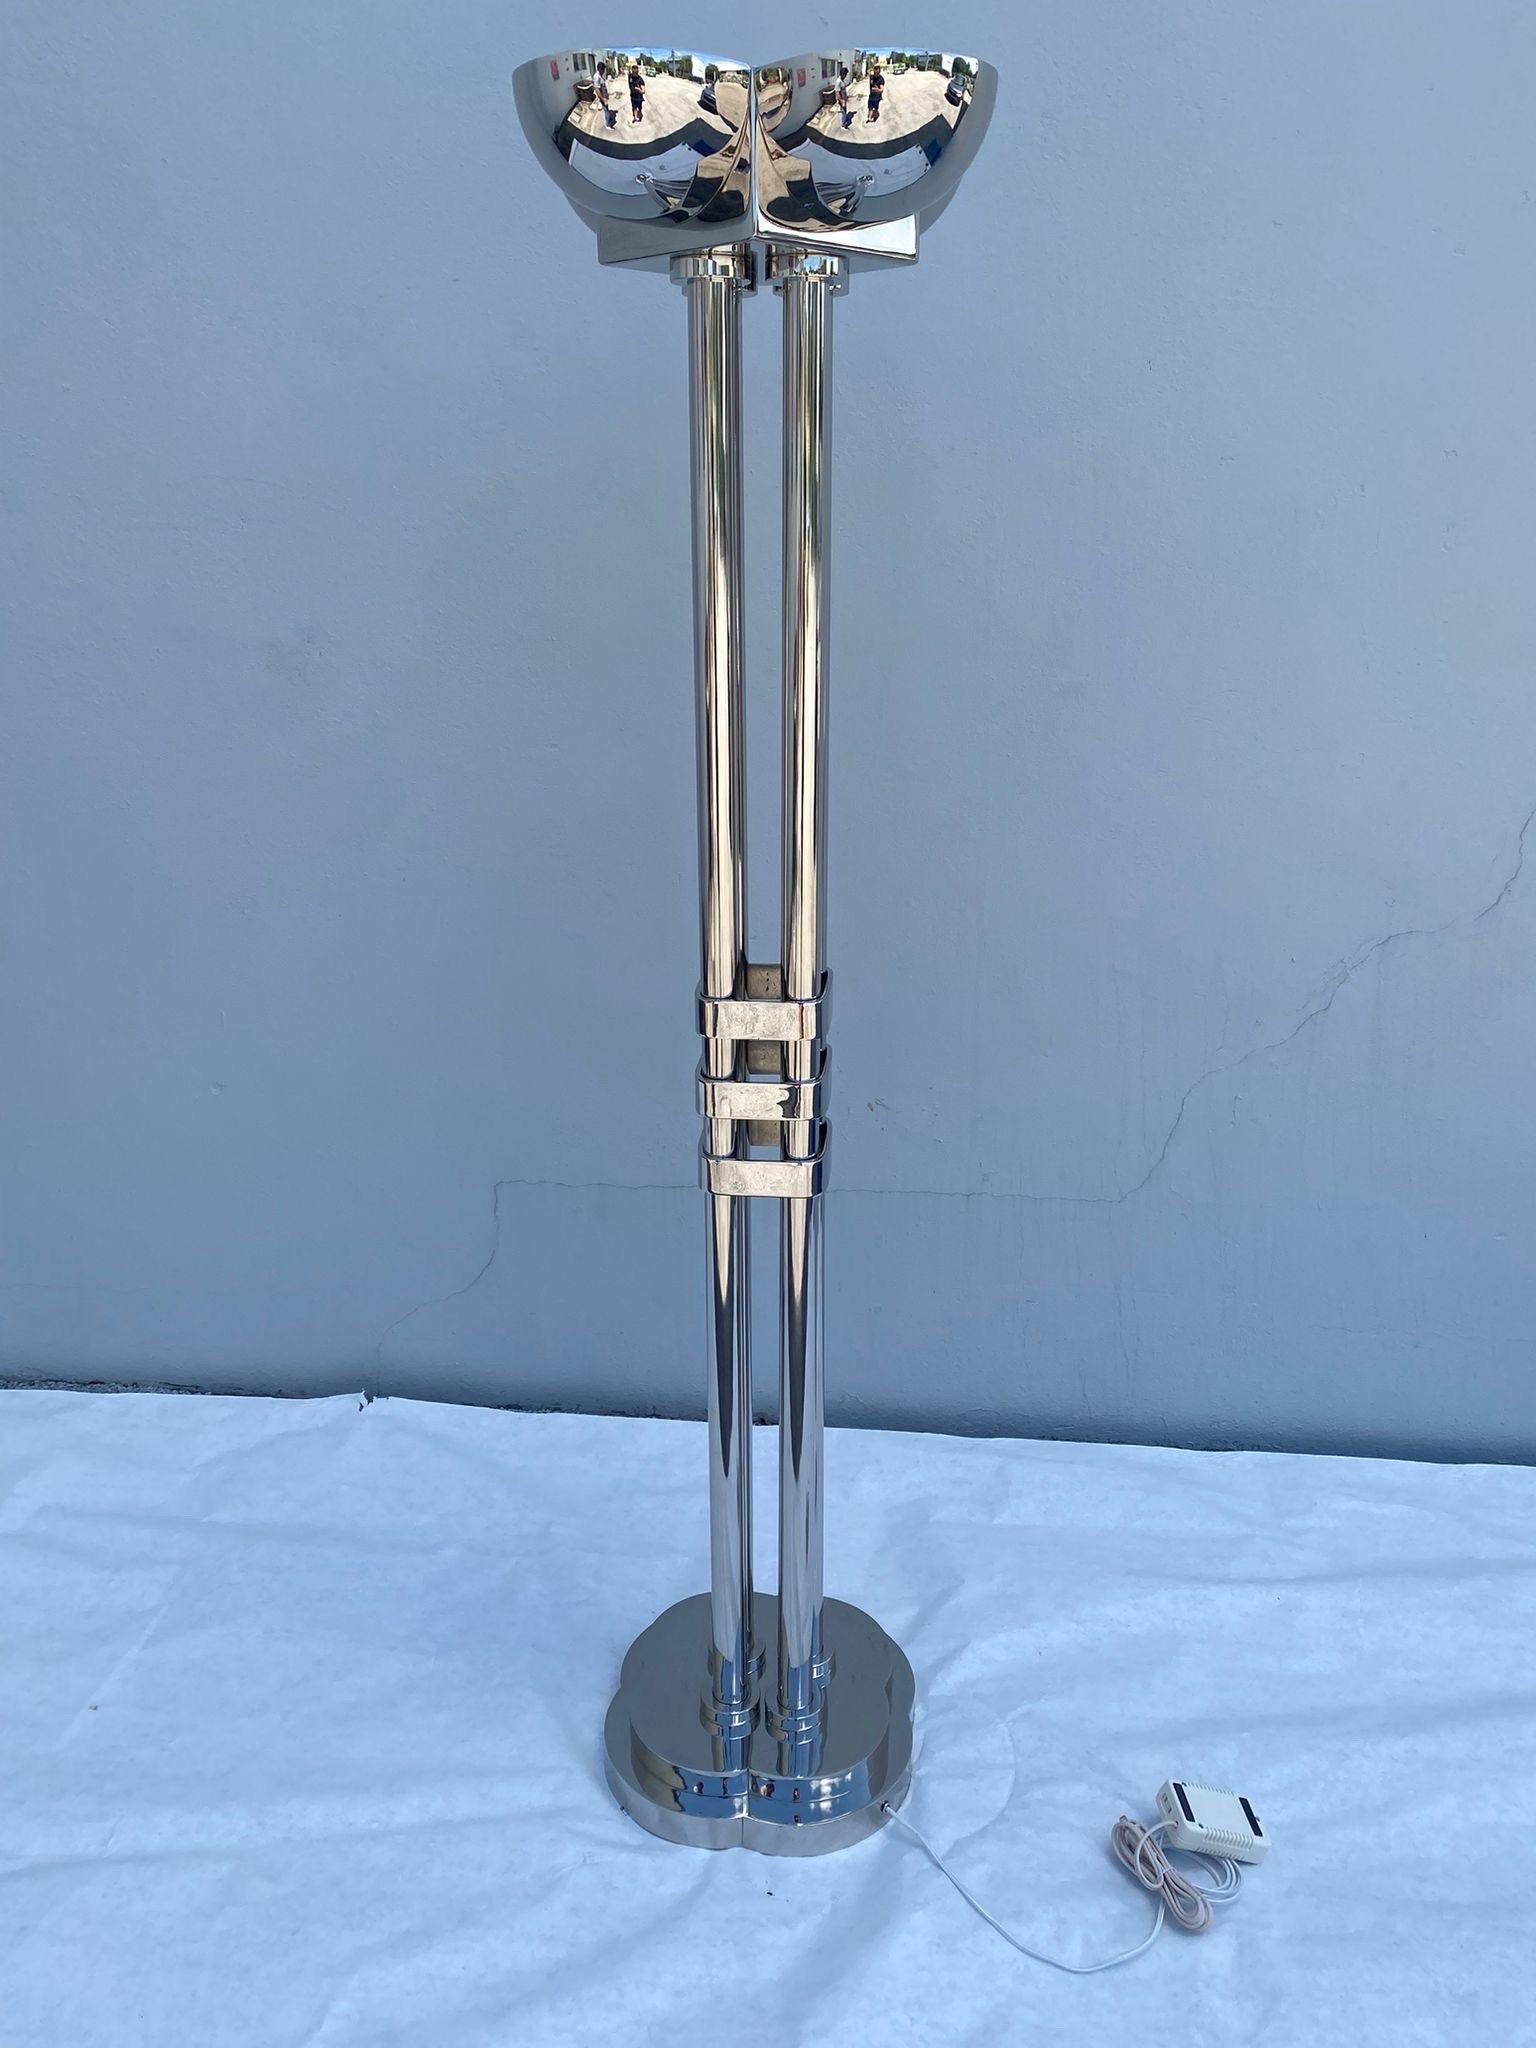 Extremely RARE, this large machine era/ Art Deco floor lamp is MARKED 